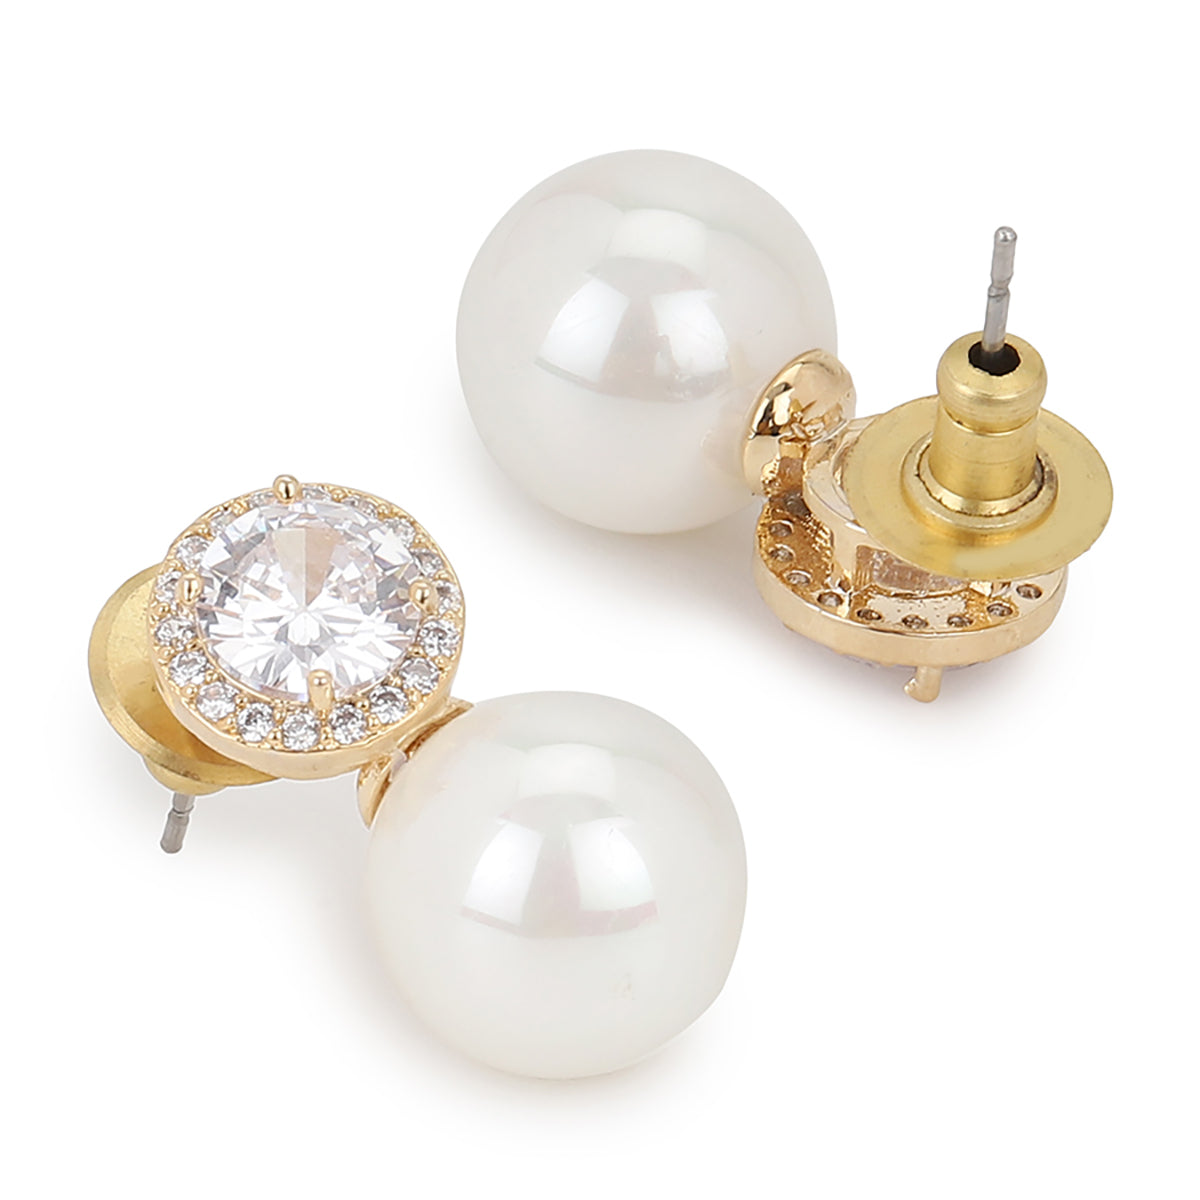 Gold-Toned & White Contemporary Studs Earrings